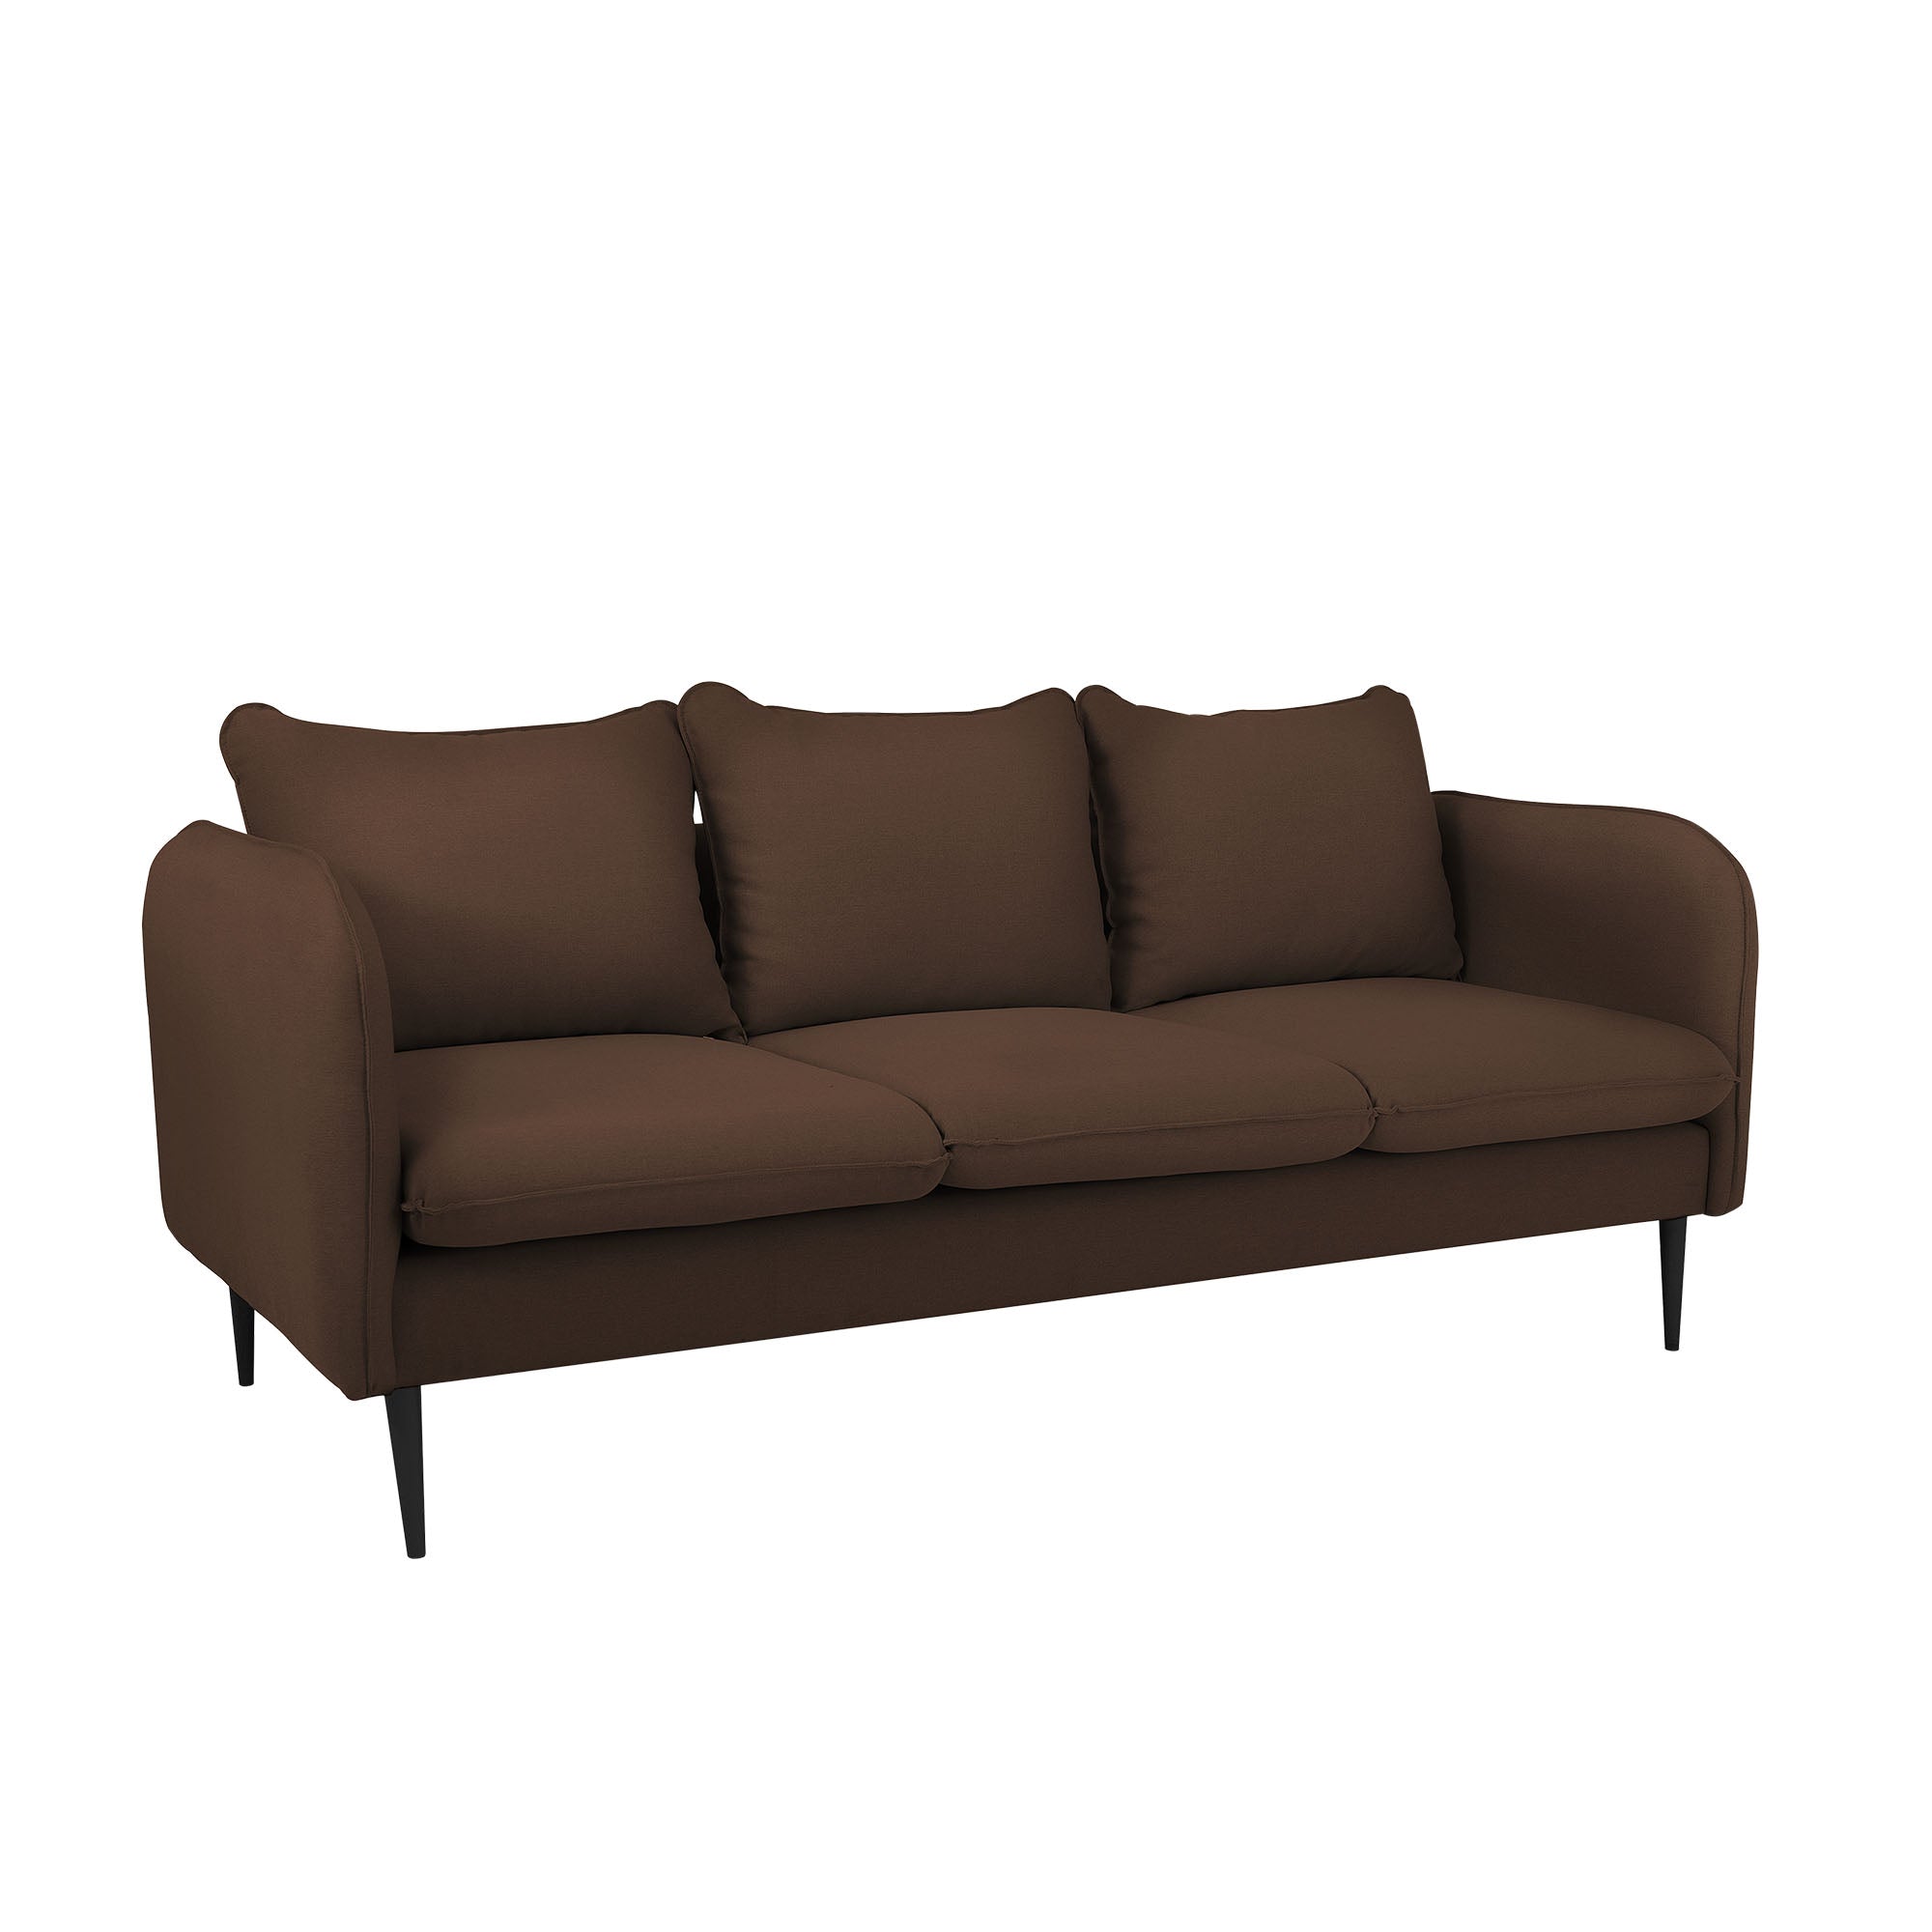 POSH BLACK Sofa 3 Seaters upholstery colour-brown